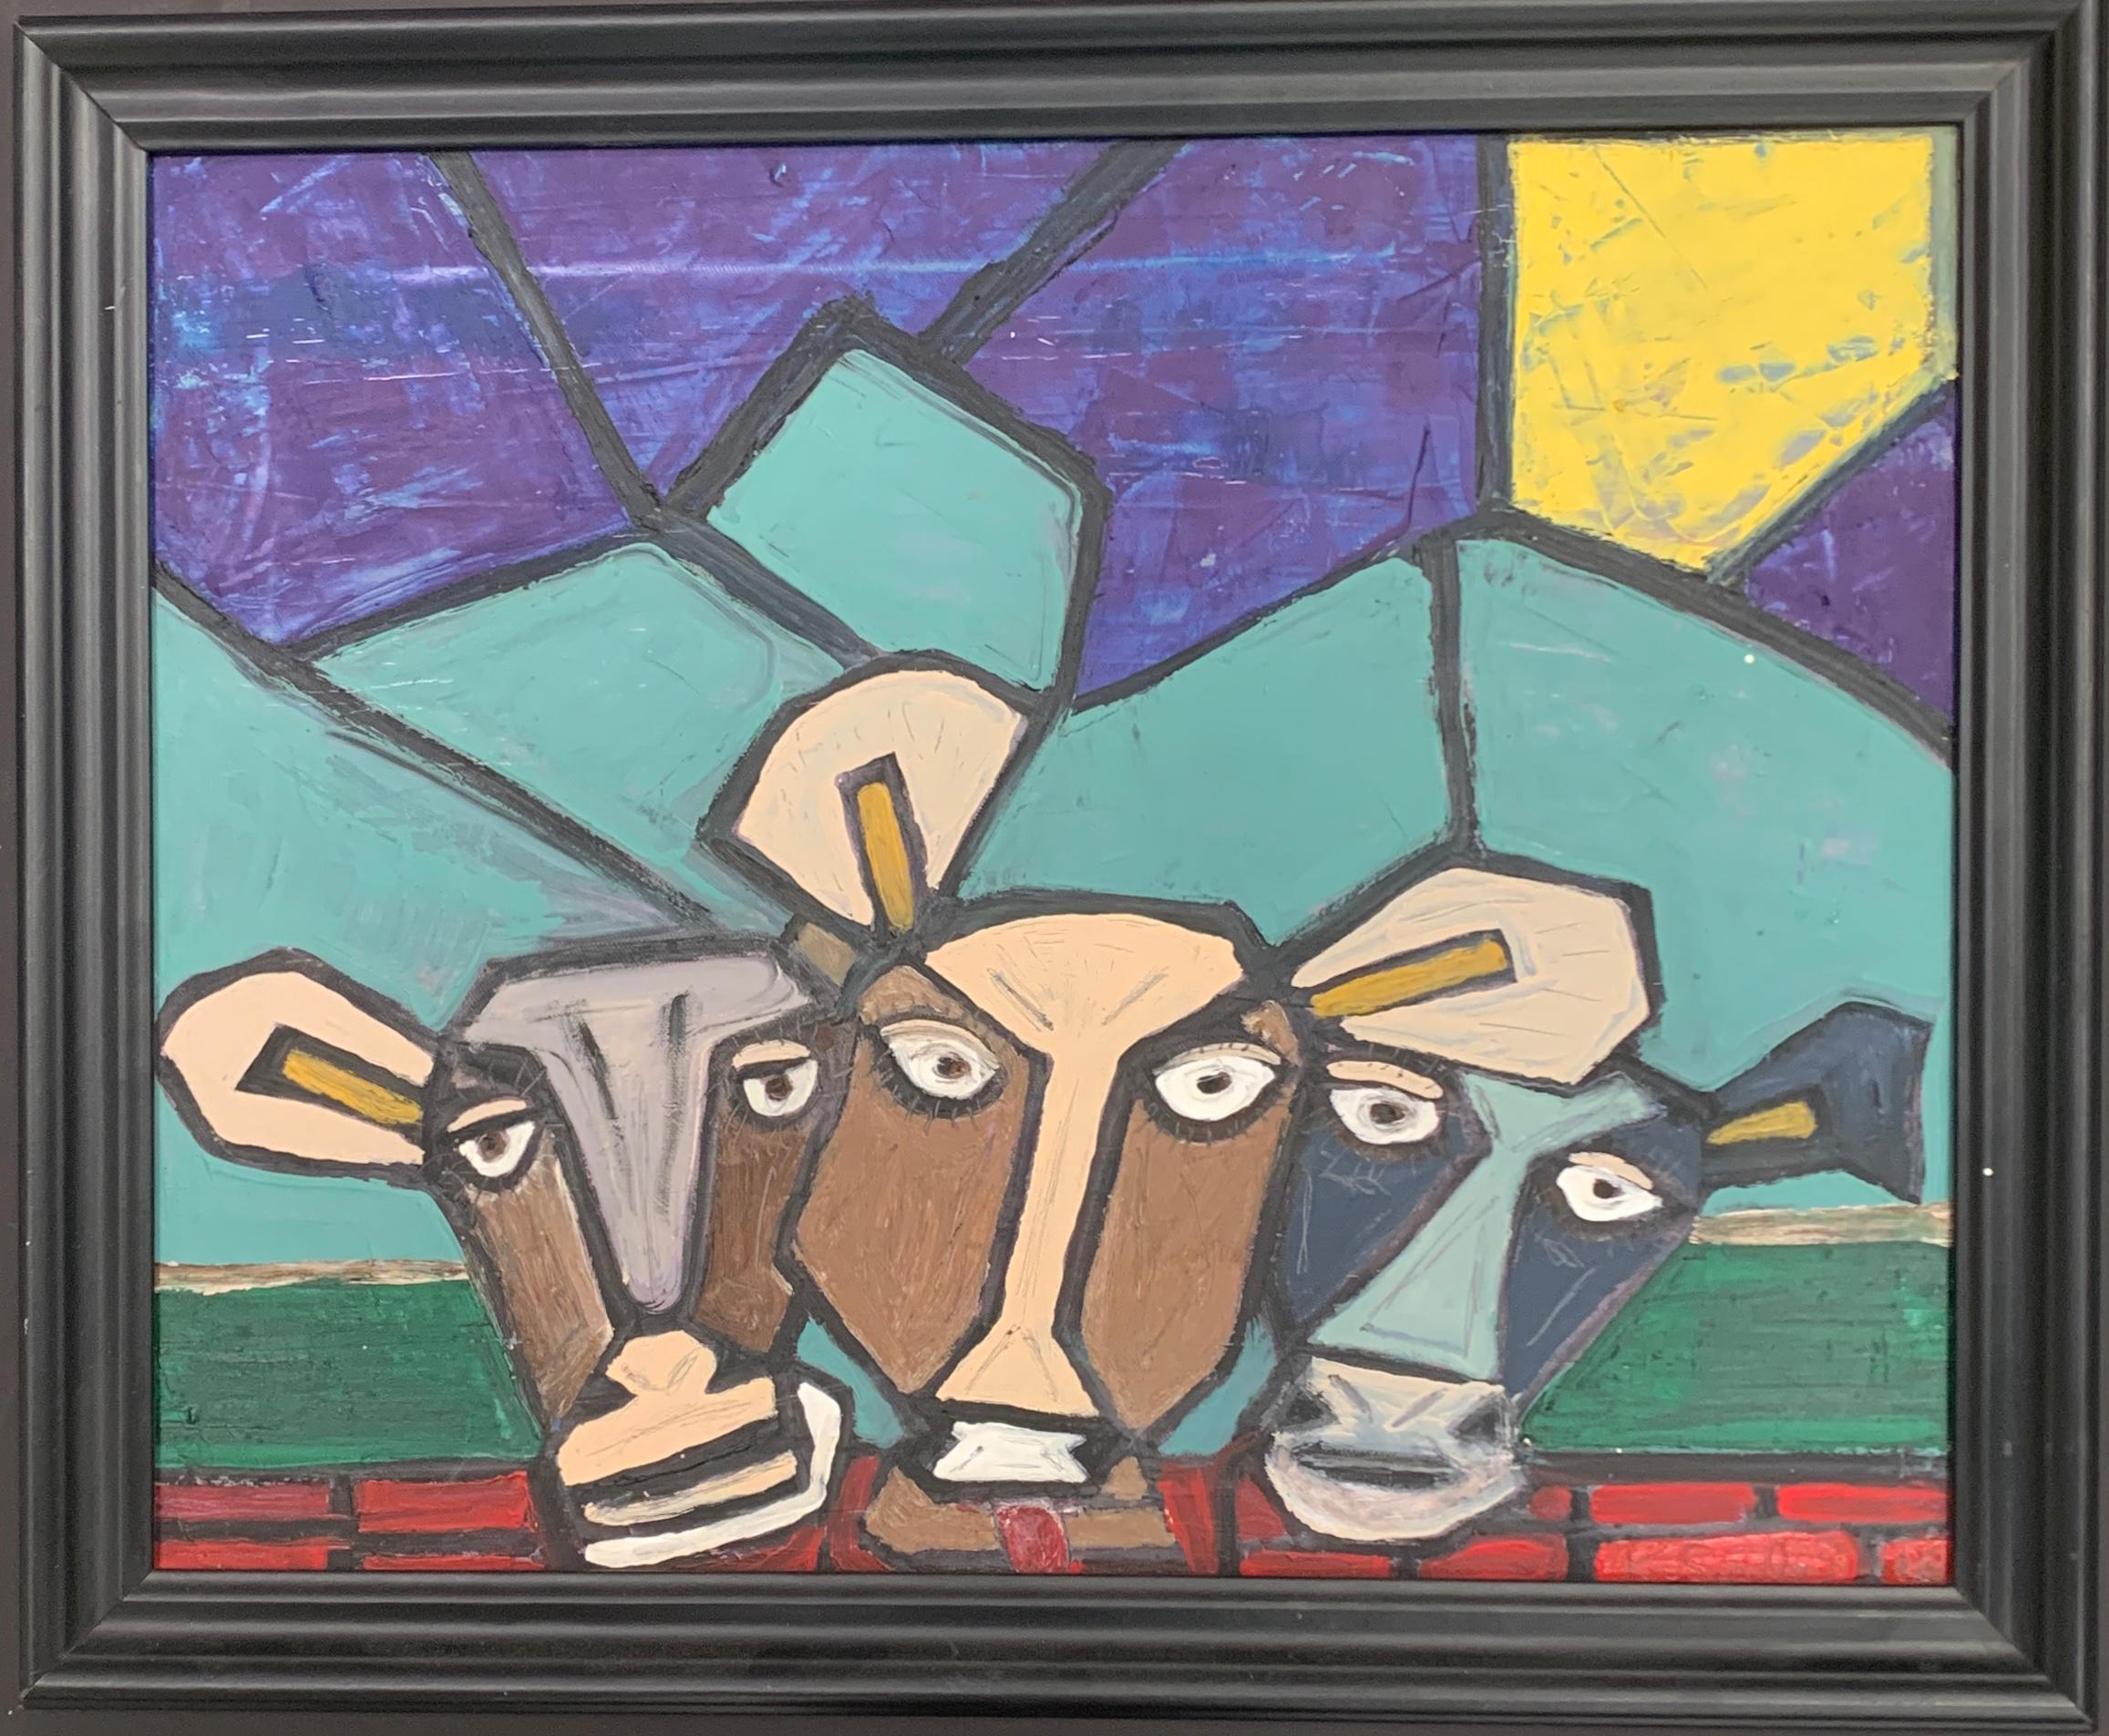 Abstract Cows lining up for feeding by American Artist Kevin Steele